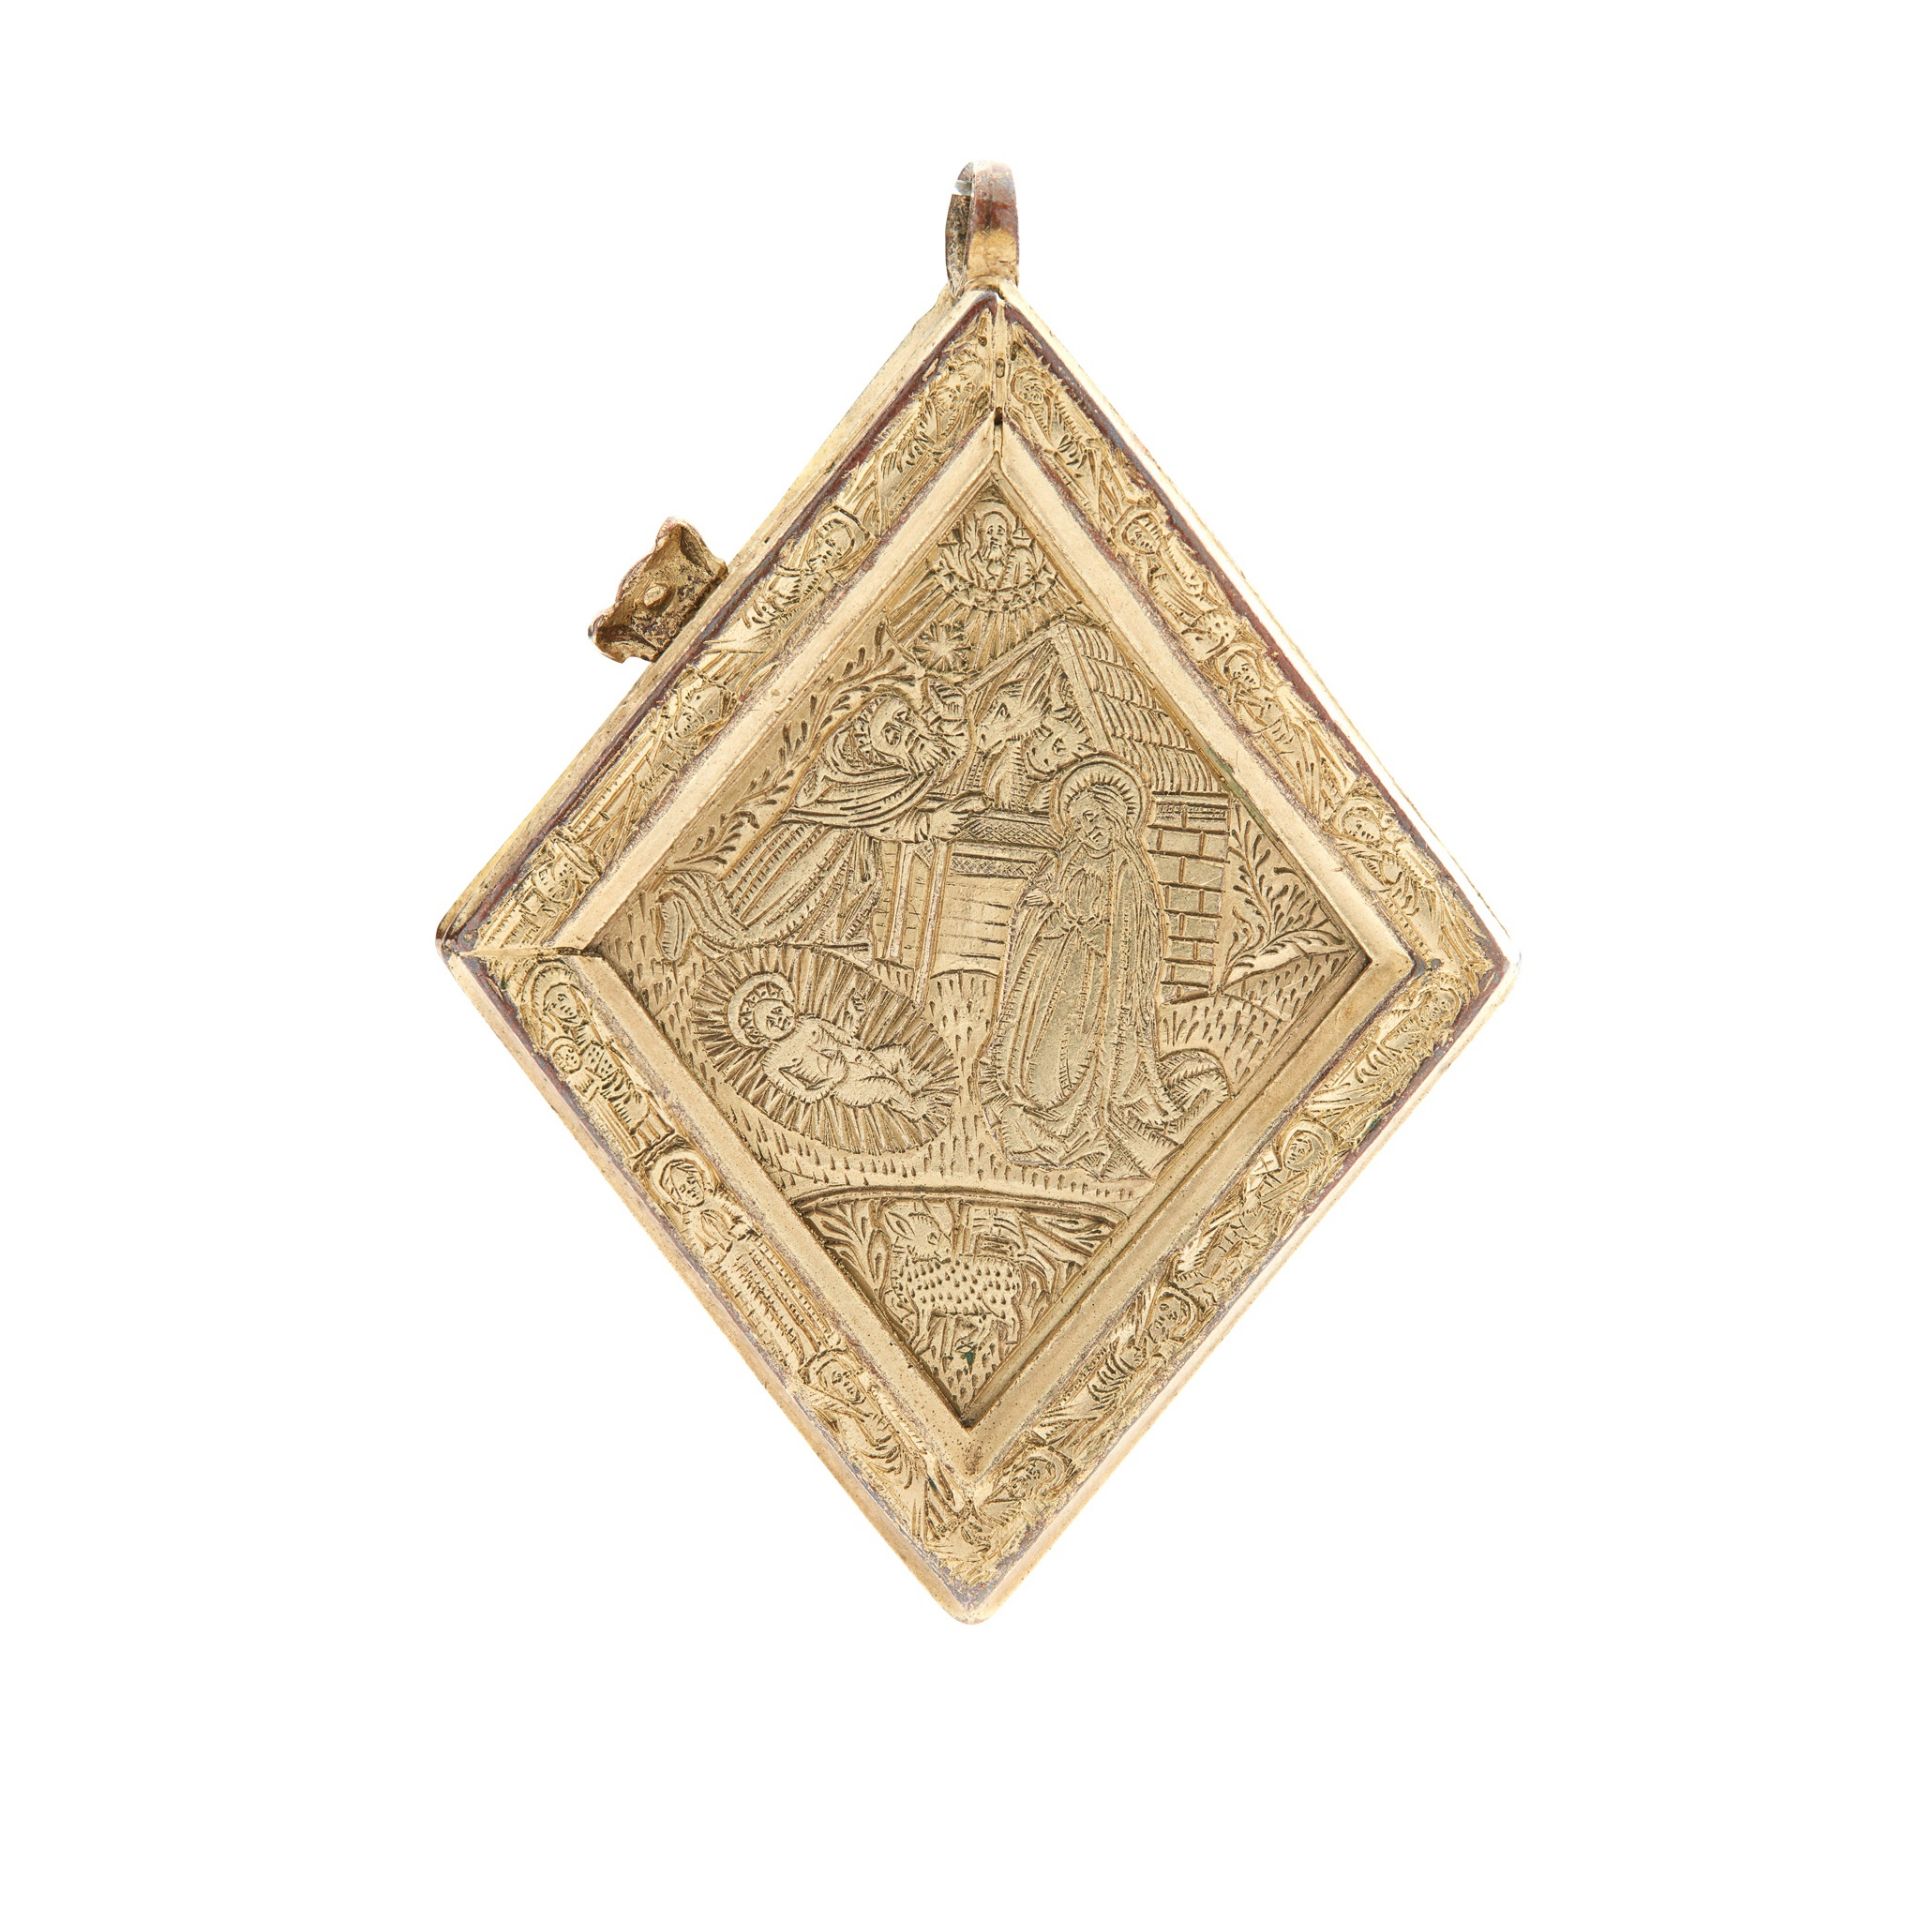 A copy of the Middleham Jewel - Image 2 of 2